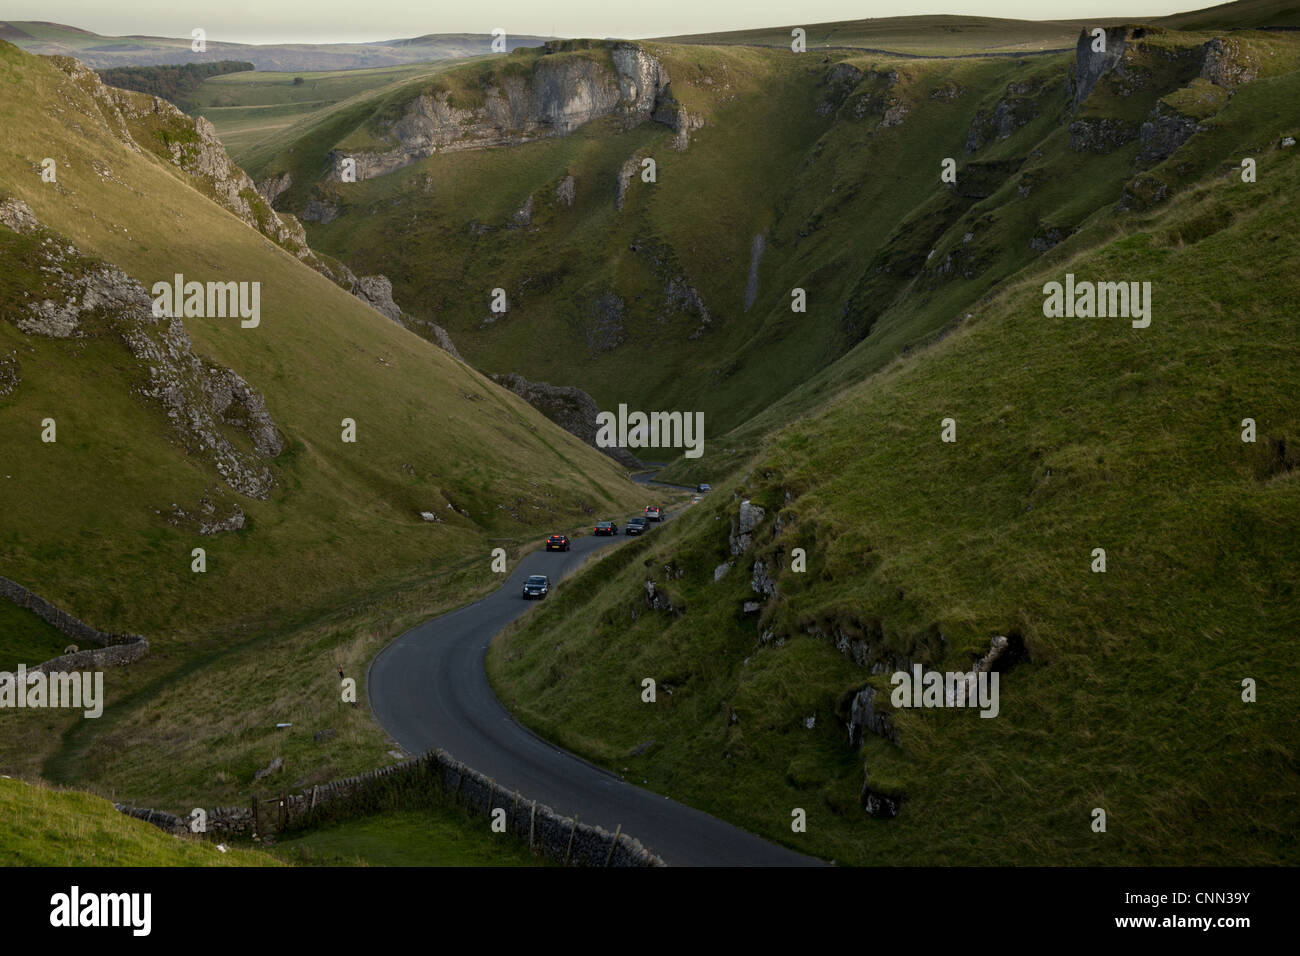 View of cars on road through moorland with limestone pinnacles, Winnats Pass, Hope Valley, Peak District, Derbyshire, England Stock Photo